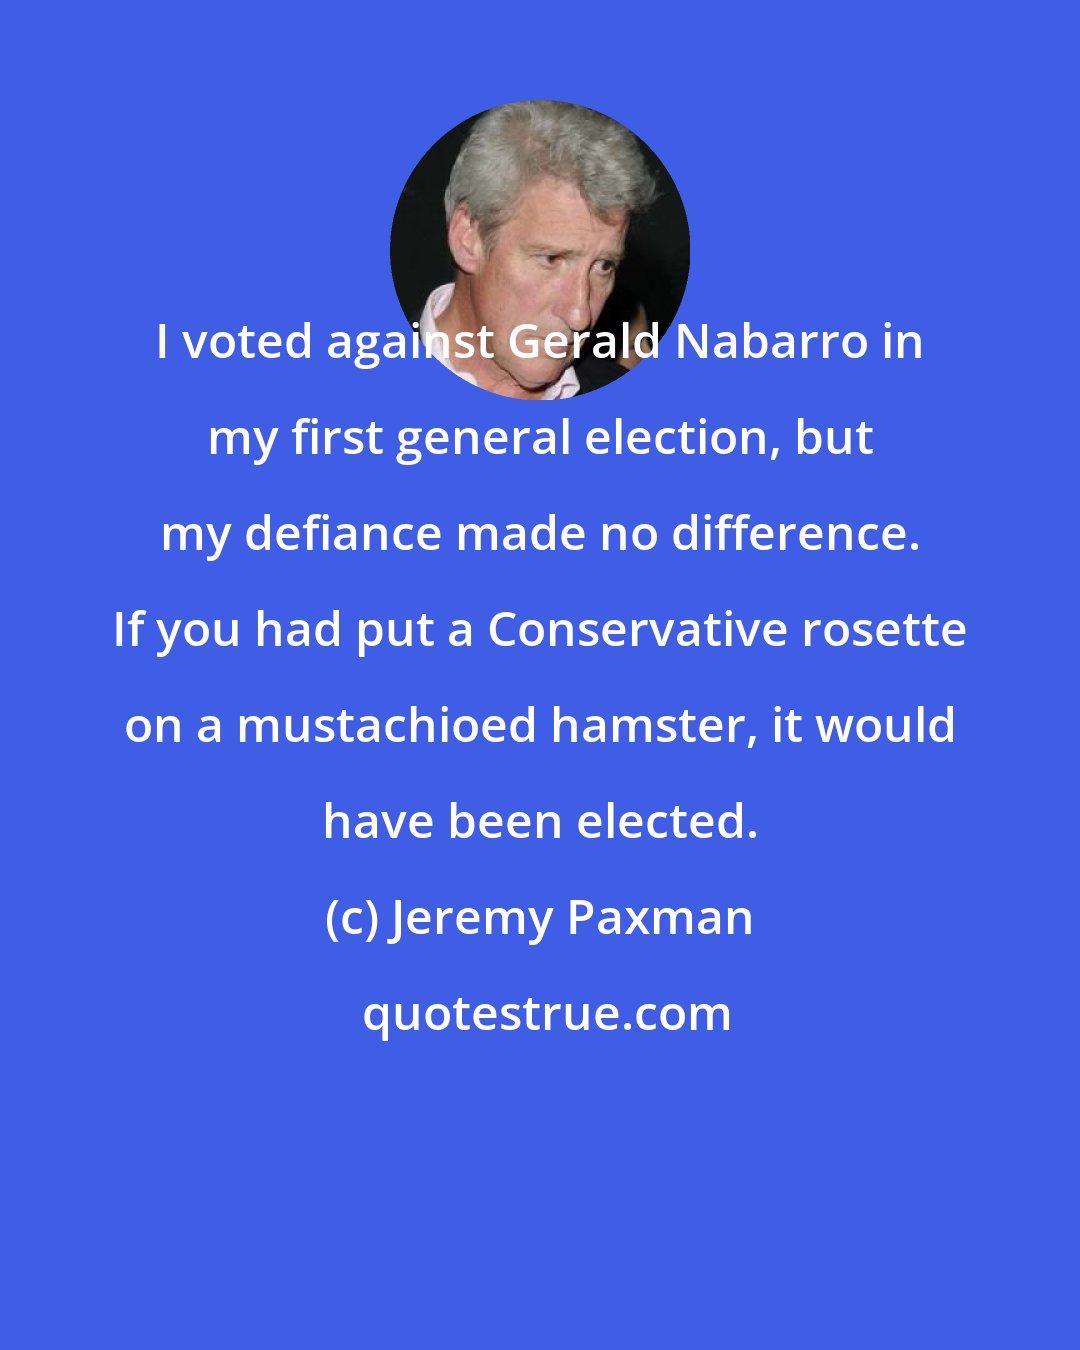 Jeremy Paxman: I voted against Gerald Nabarro in my first general election, but my defiance made no difference. If you had put a Conservative rosette on a mustachioed hamster, it would have been elected.